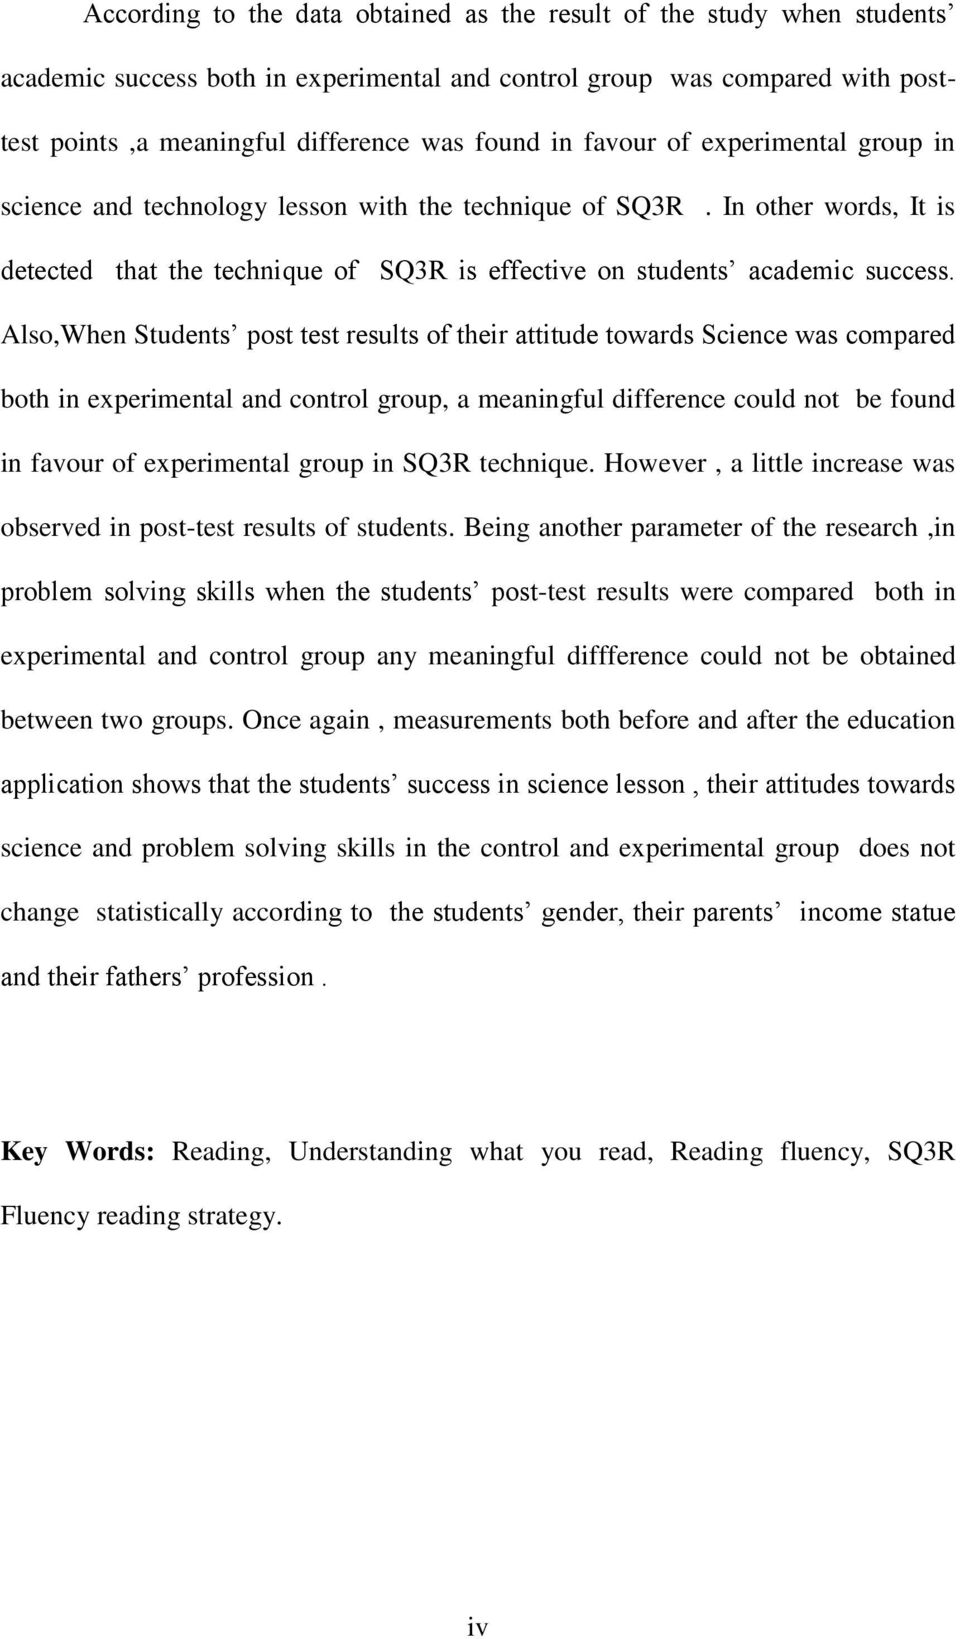 Also,When Students post test results of their attitude towards Science was compared both in experimental and control group, a meaningful difference could not be found in favour of experimental group